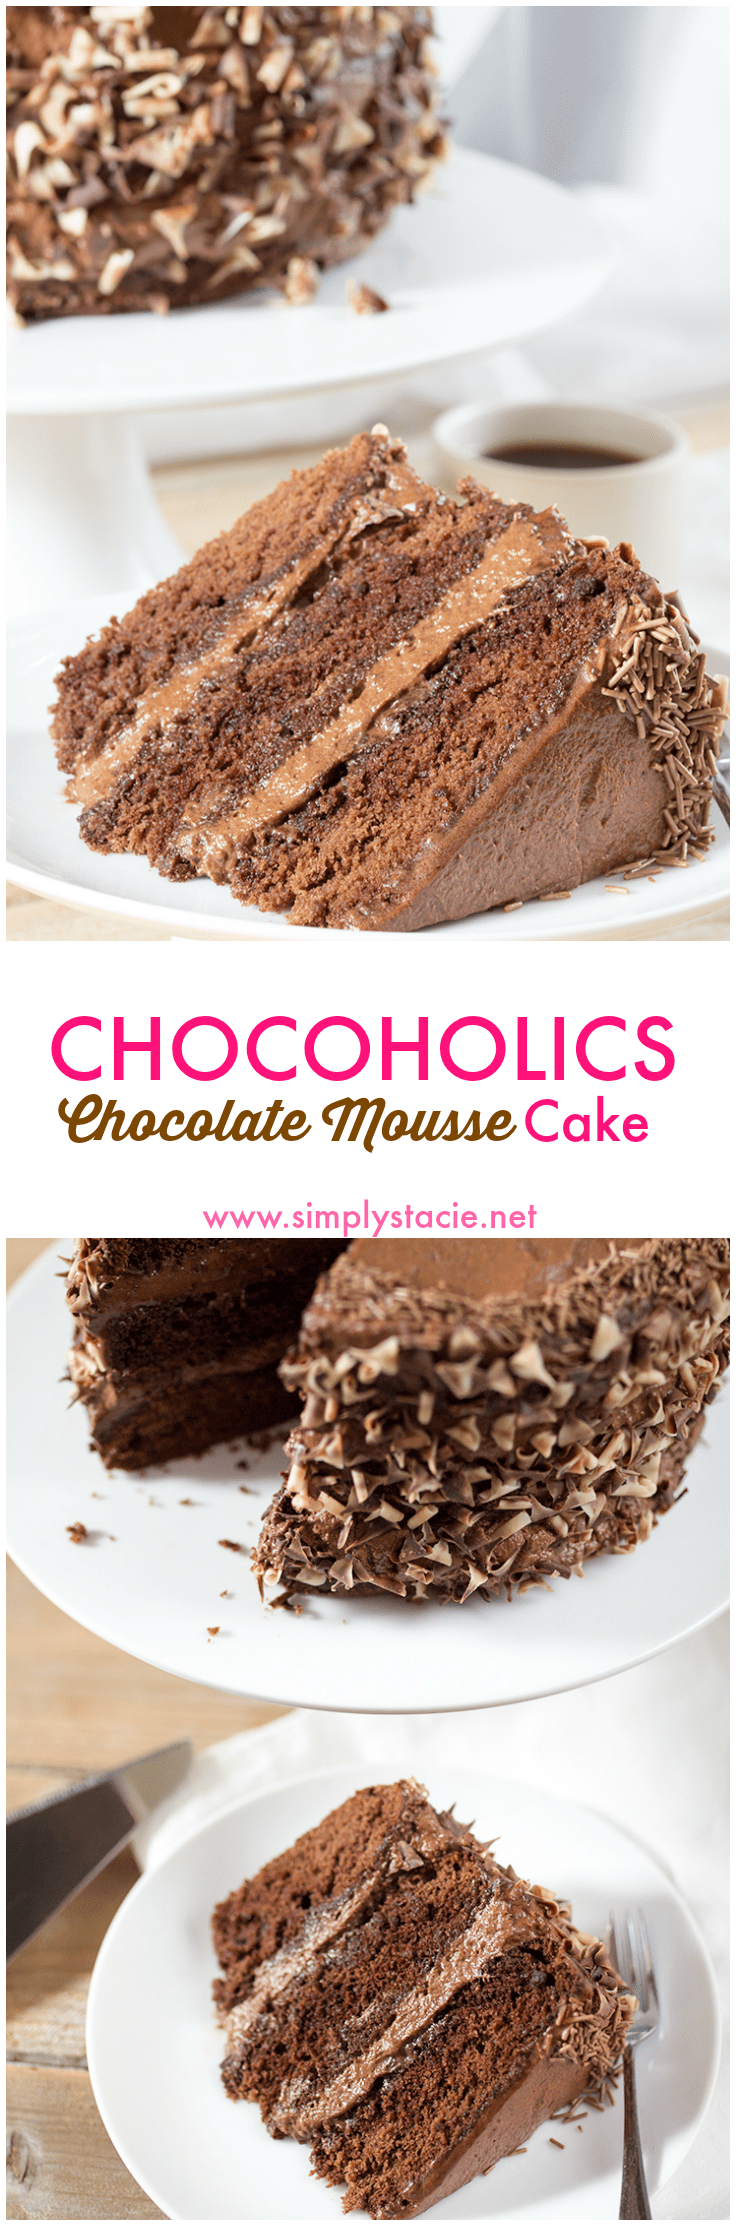 Chocoholics Chocolate Mousse Cake - Chocoholics unite! This triple-layer chocolate cake is light, fluffy, and delicious. 